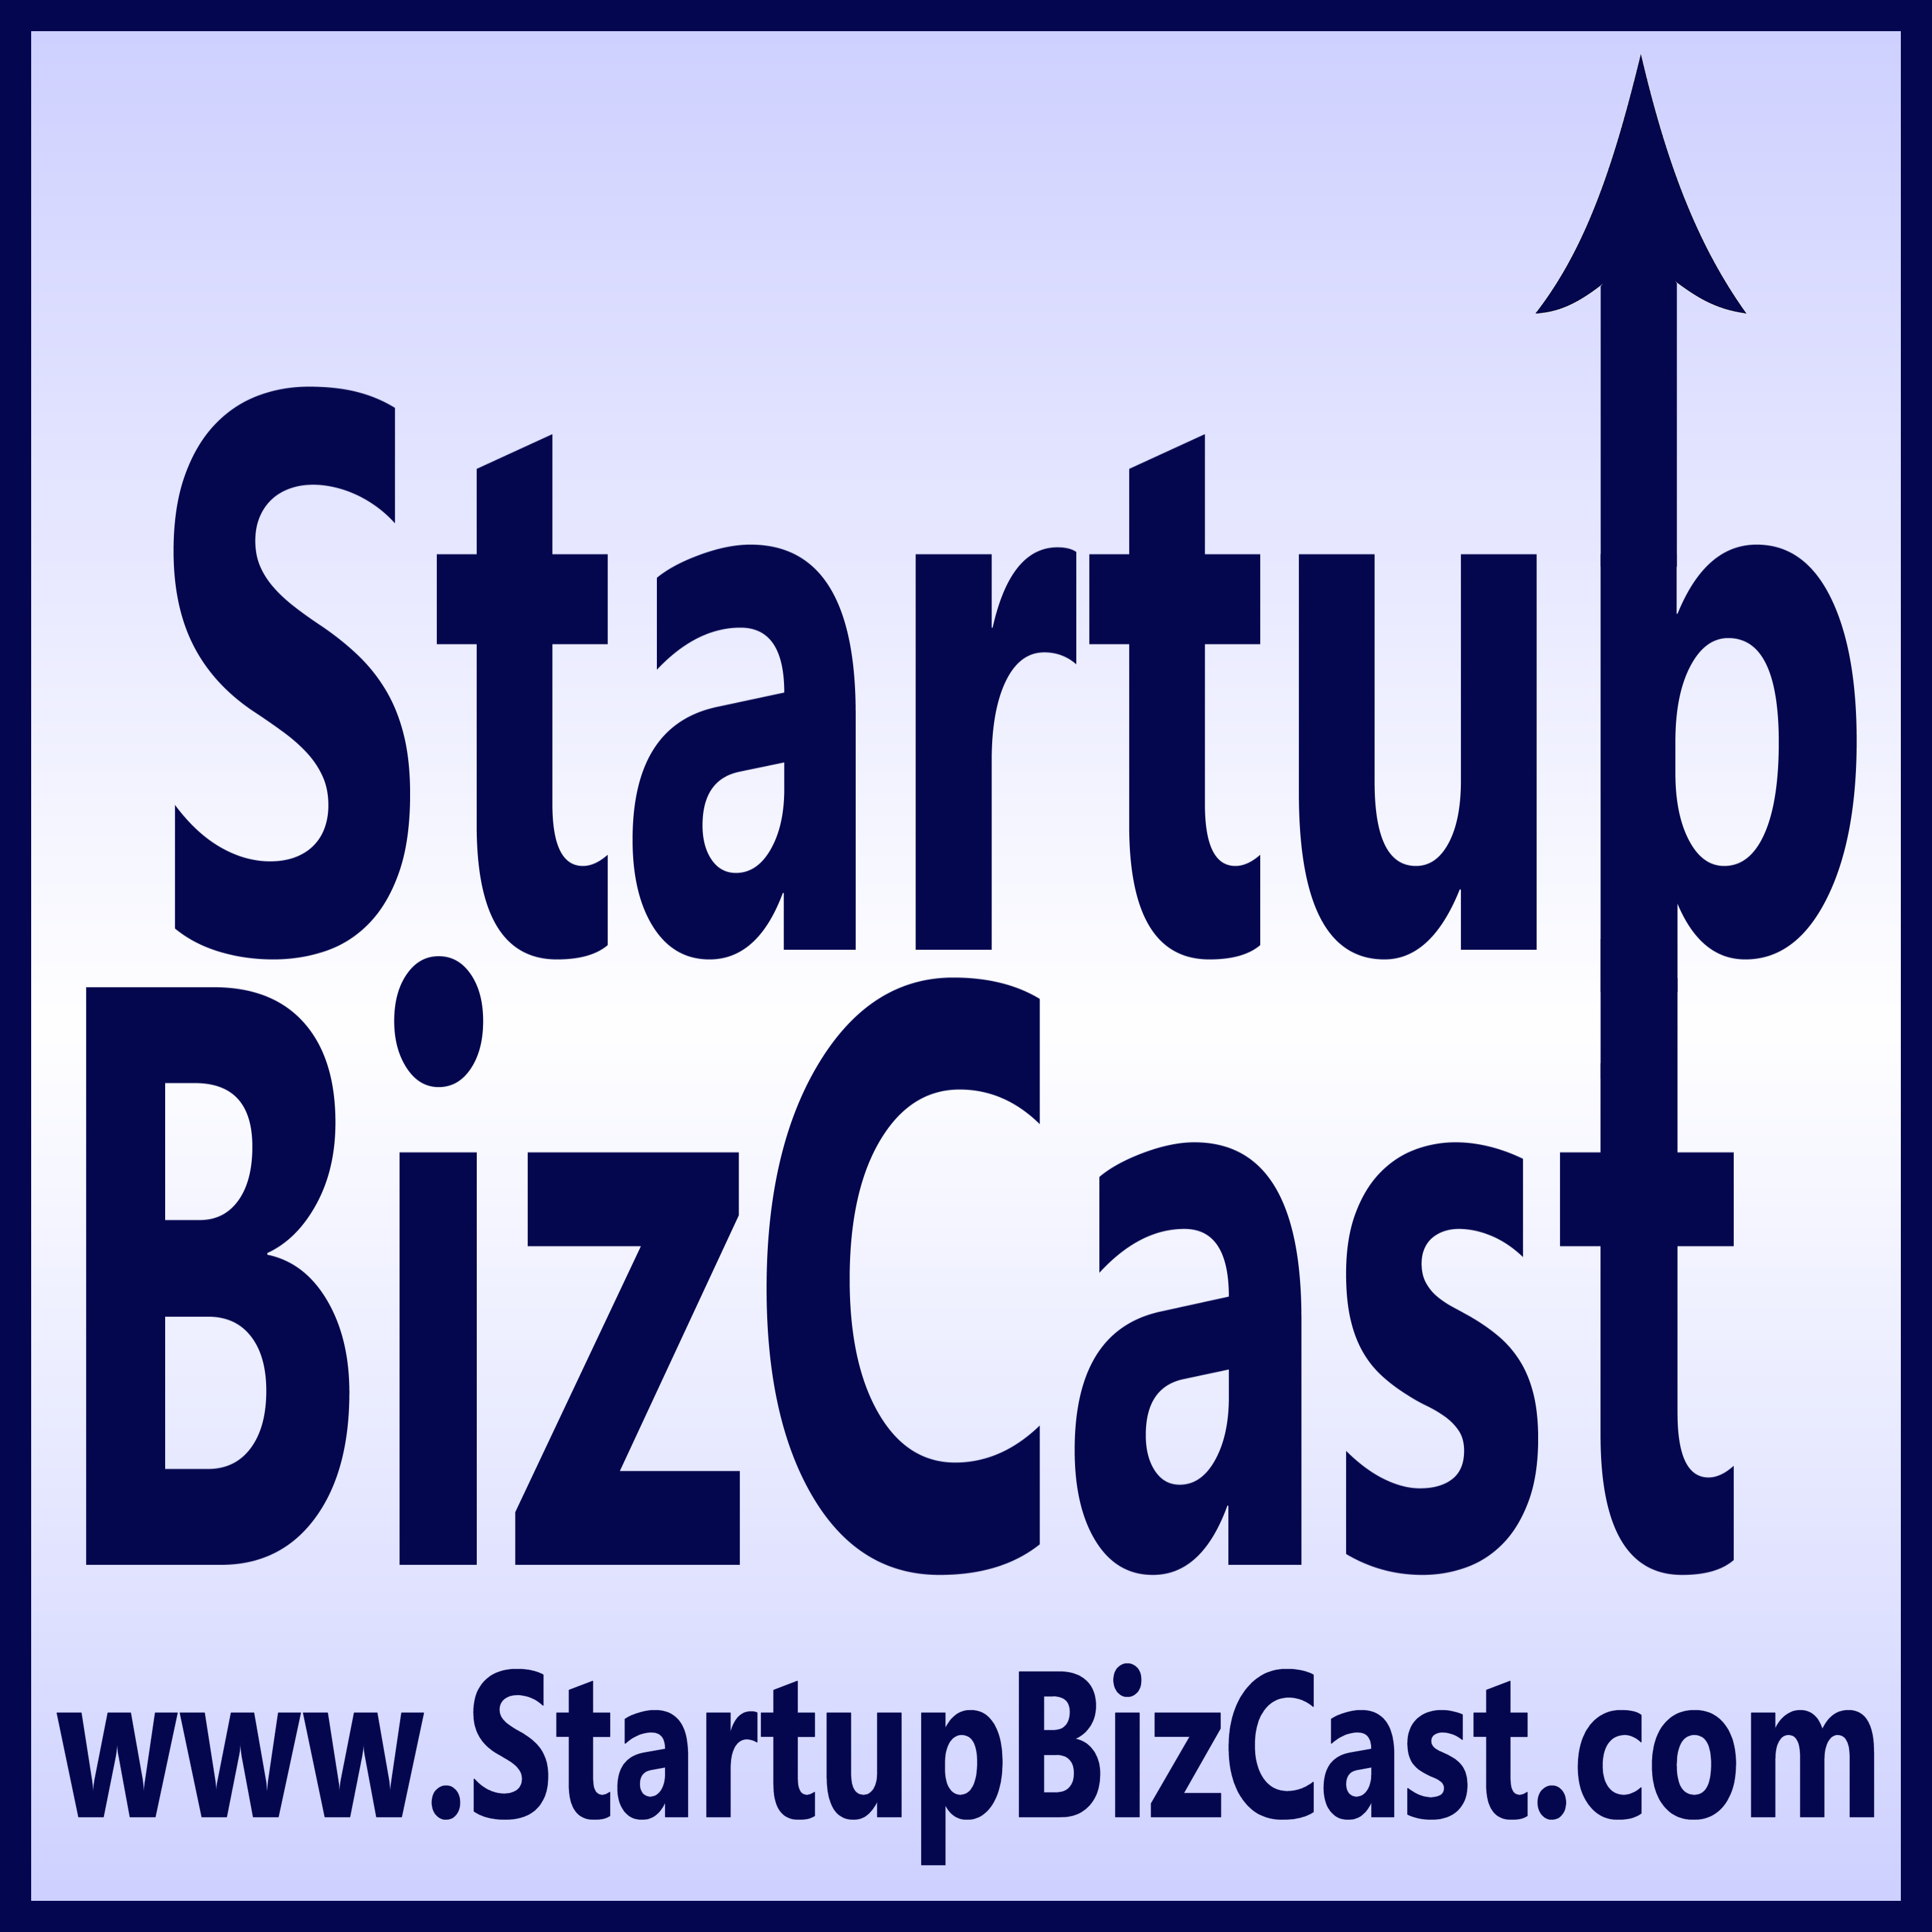 Startup BizCast - The Small Business Advice Podcast